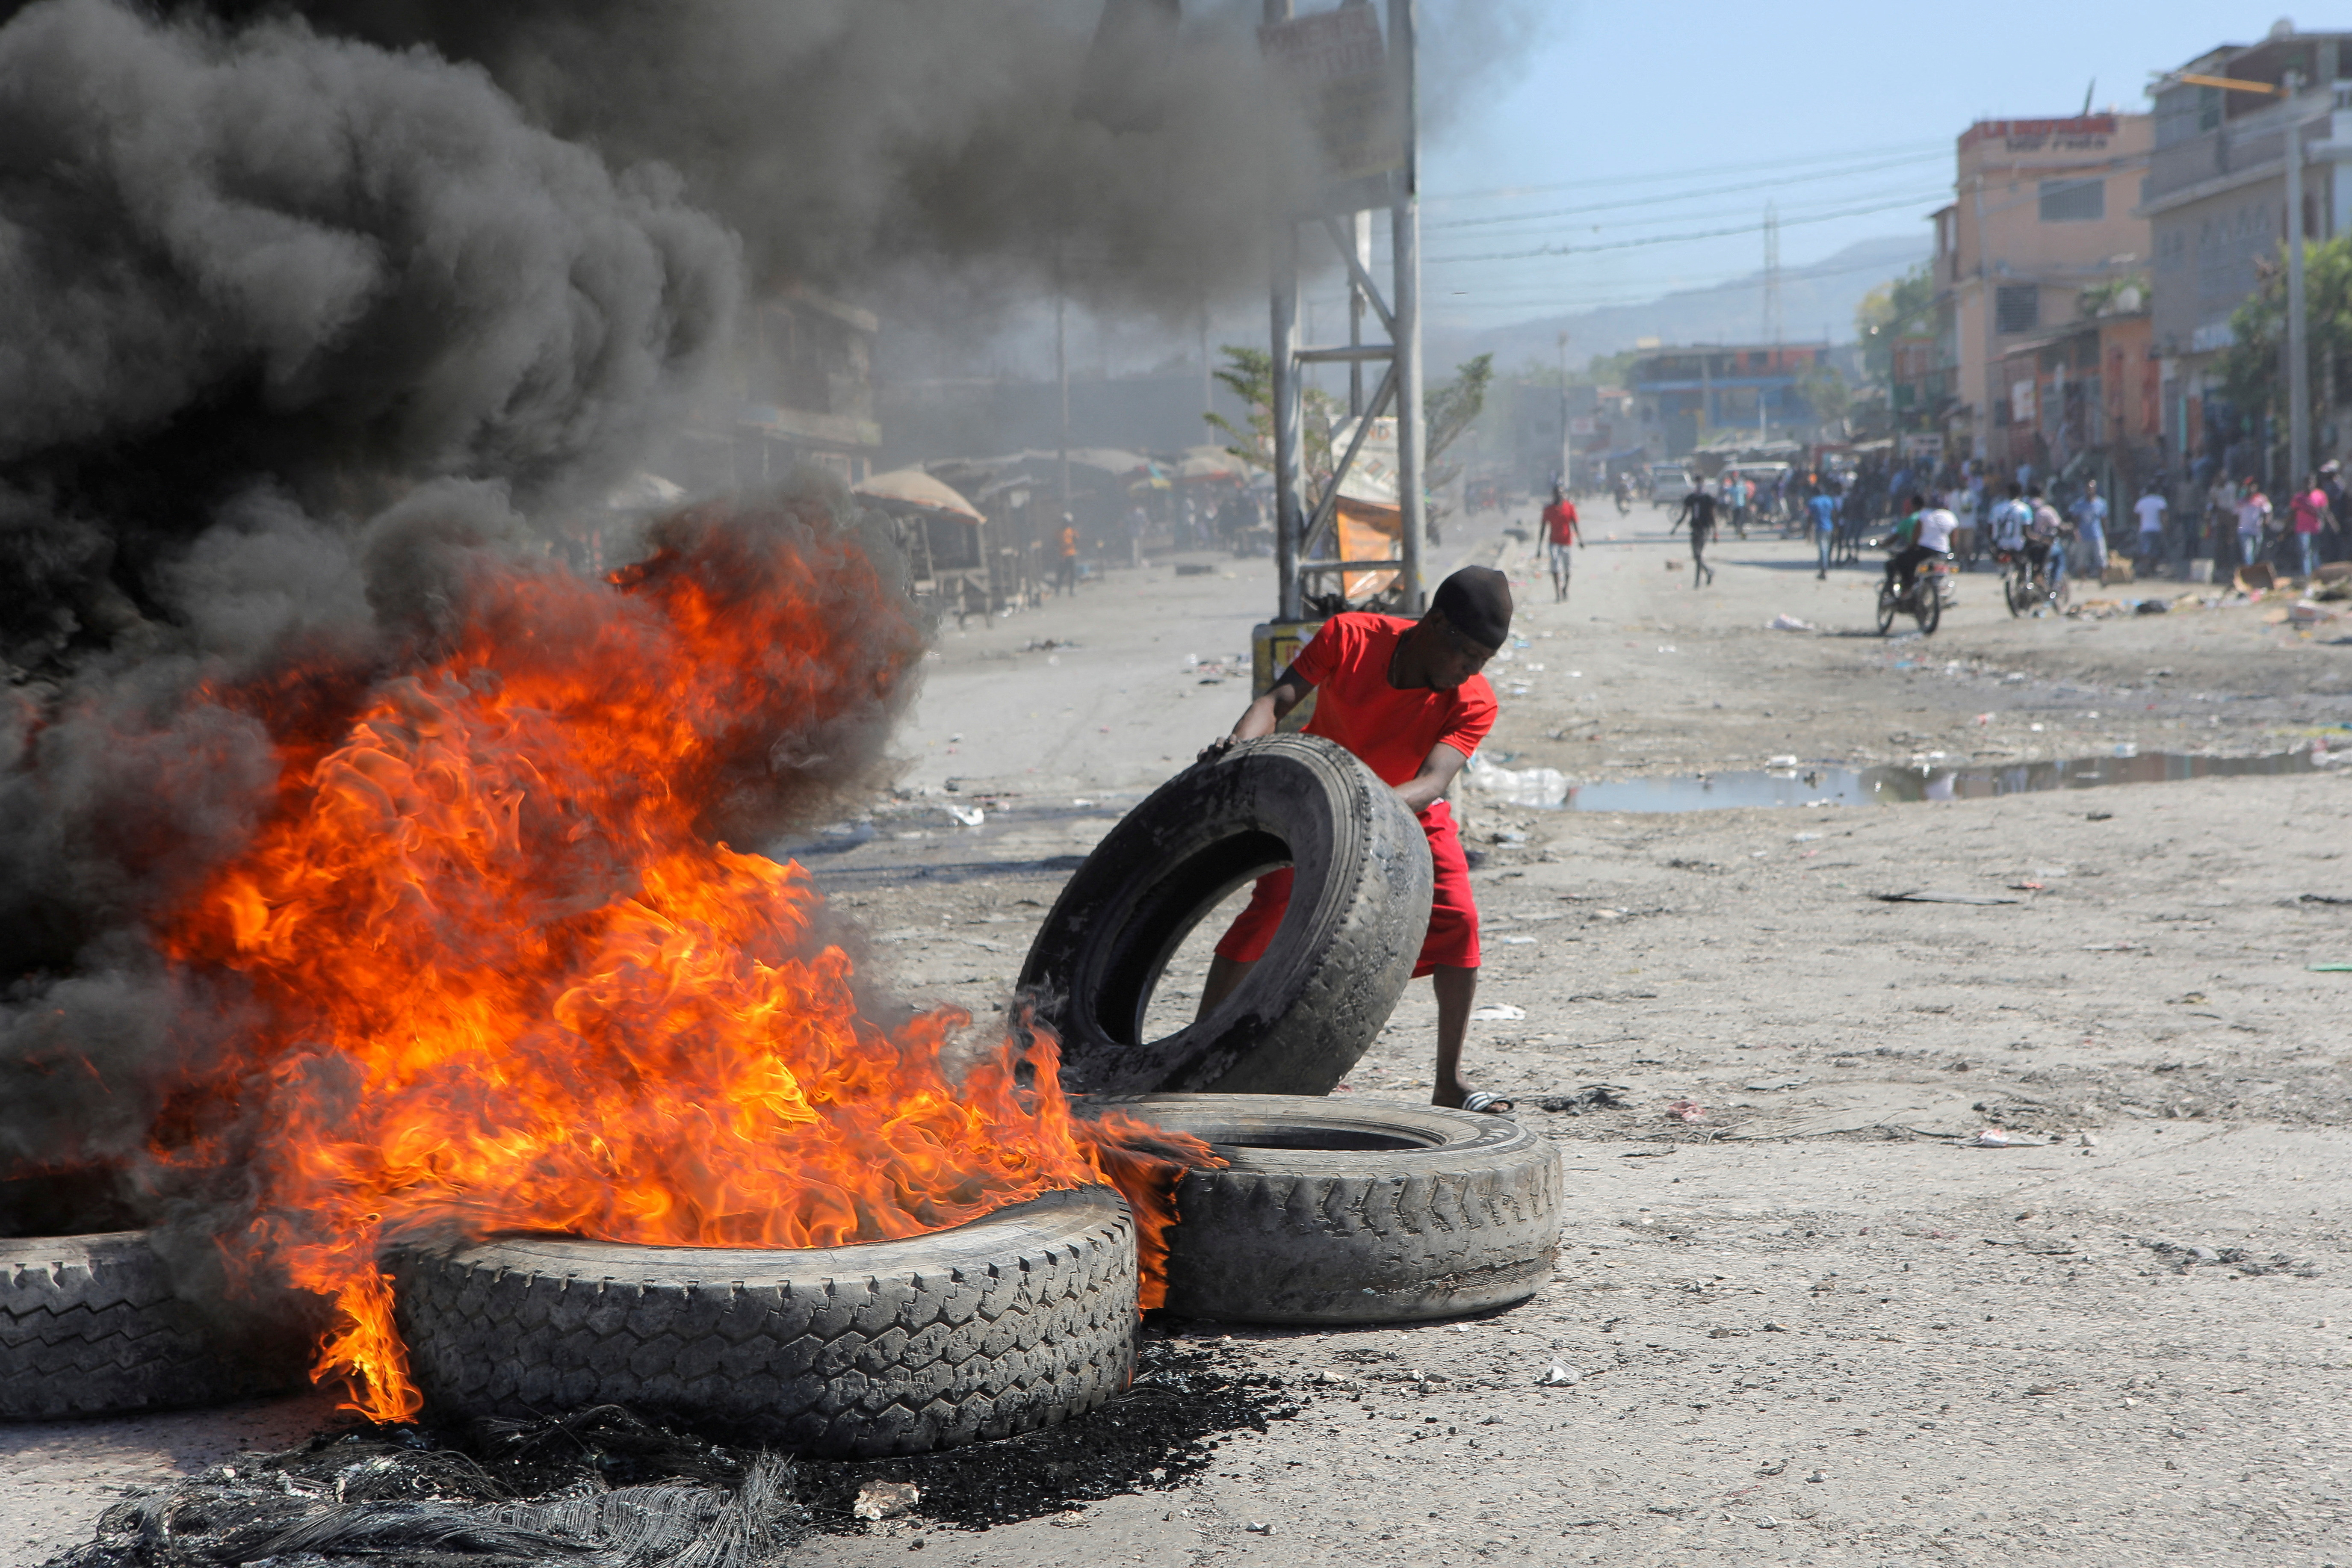 Demonstrators protest the recent killings of police officers by armed gangs, in Port-au-Prince